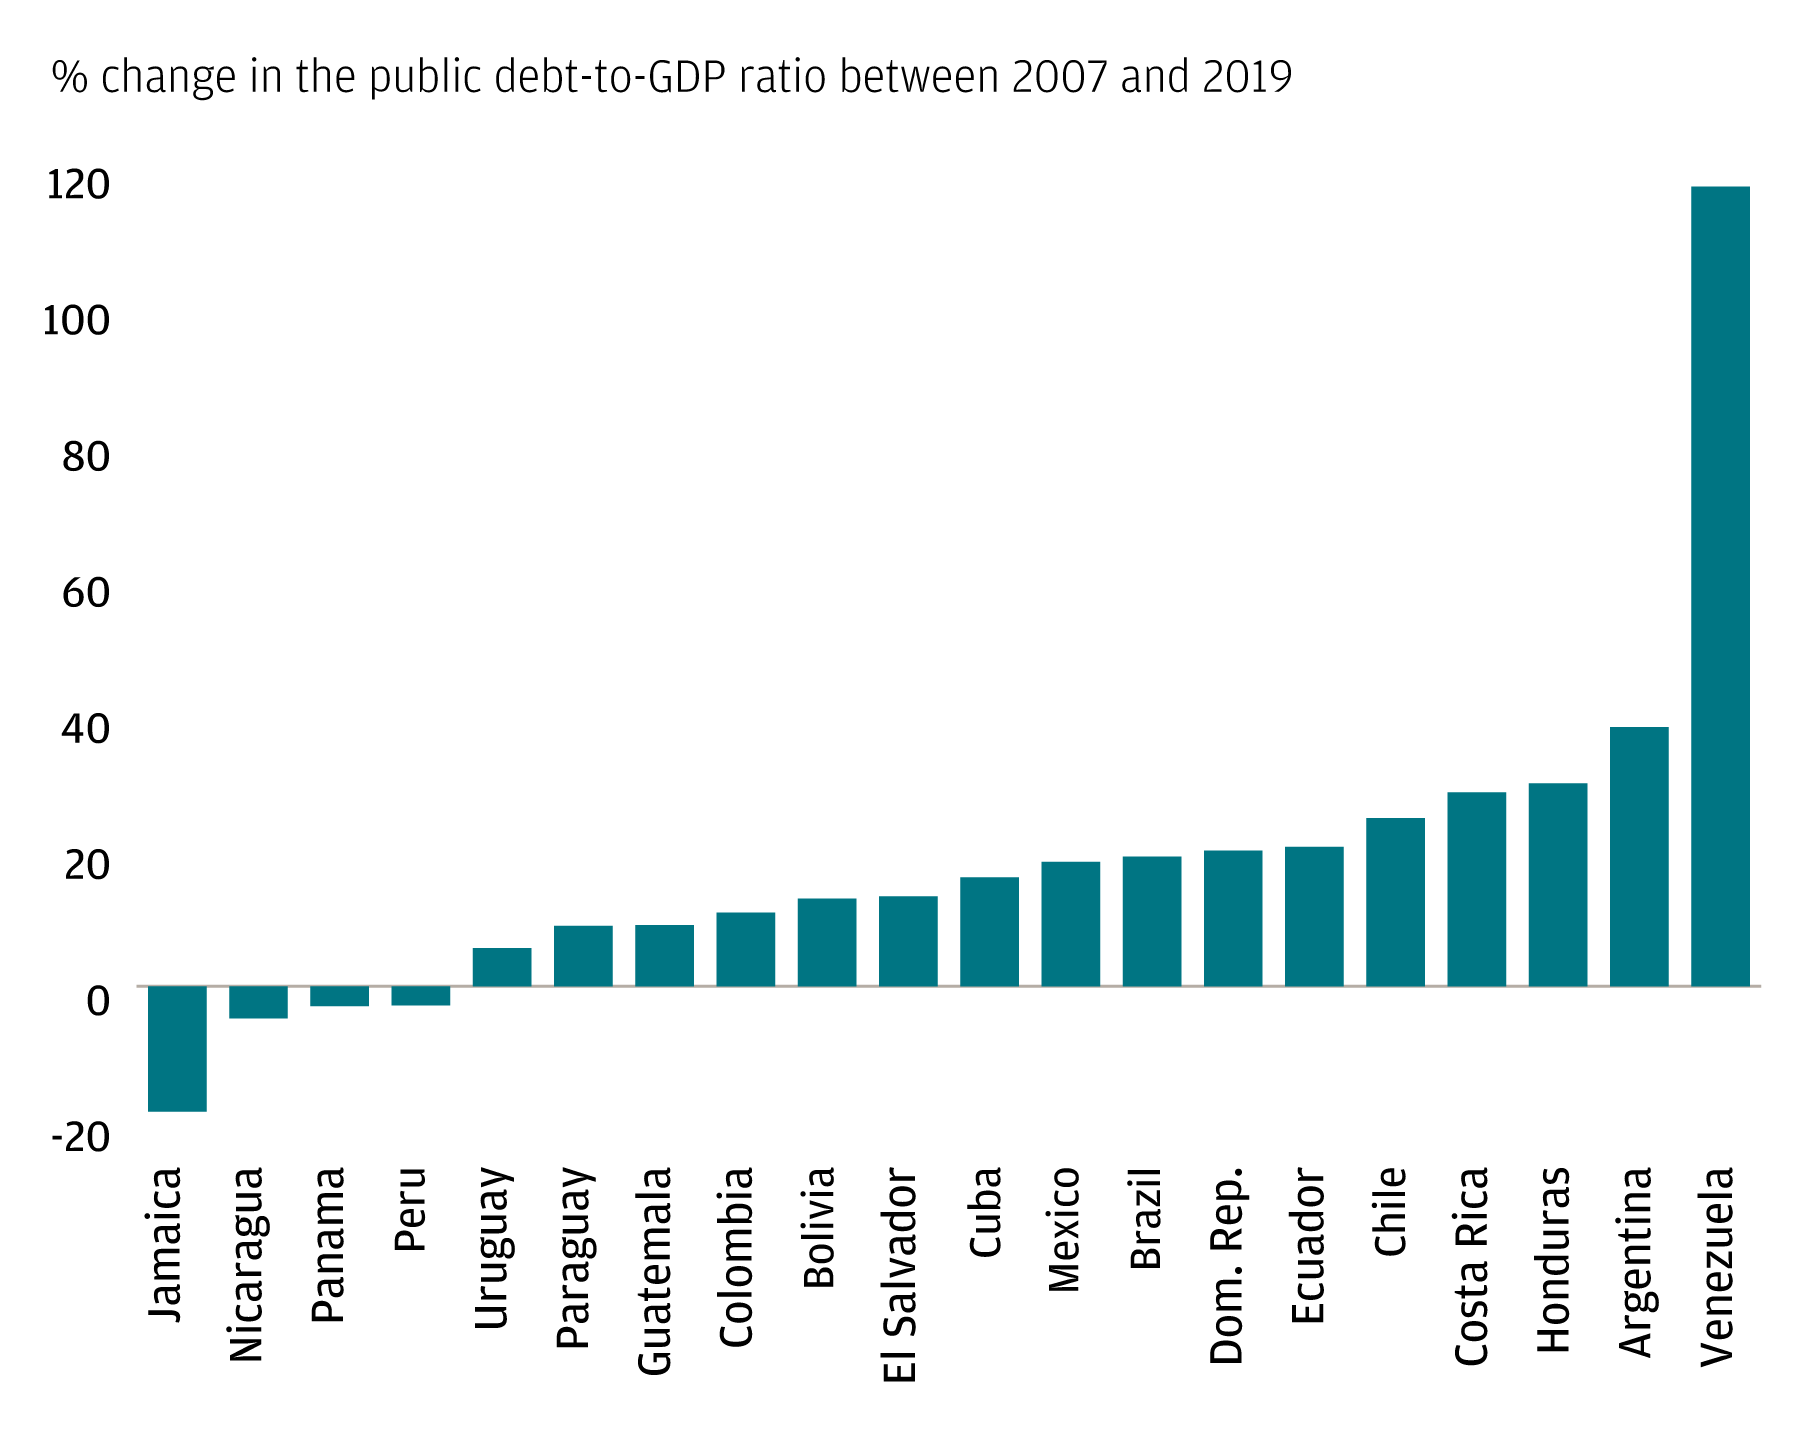 A bar chart showing the percentage-point change in the public debt-to-GDP ratio between 2007 and 2019 for select Latin America and Caribbean countries.